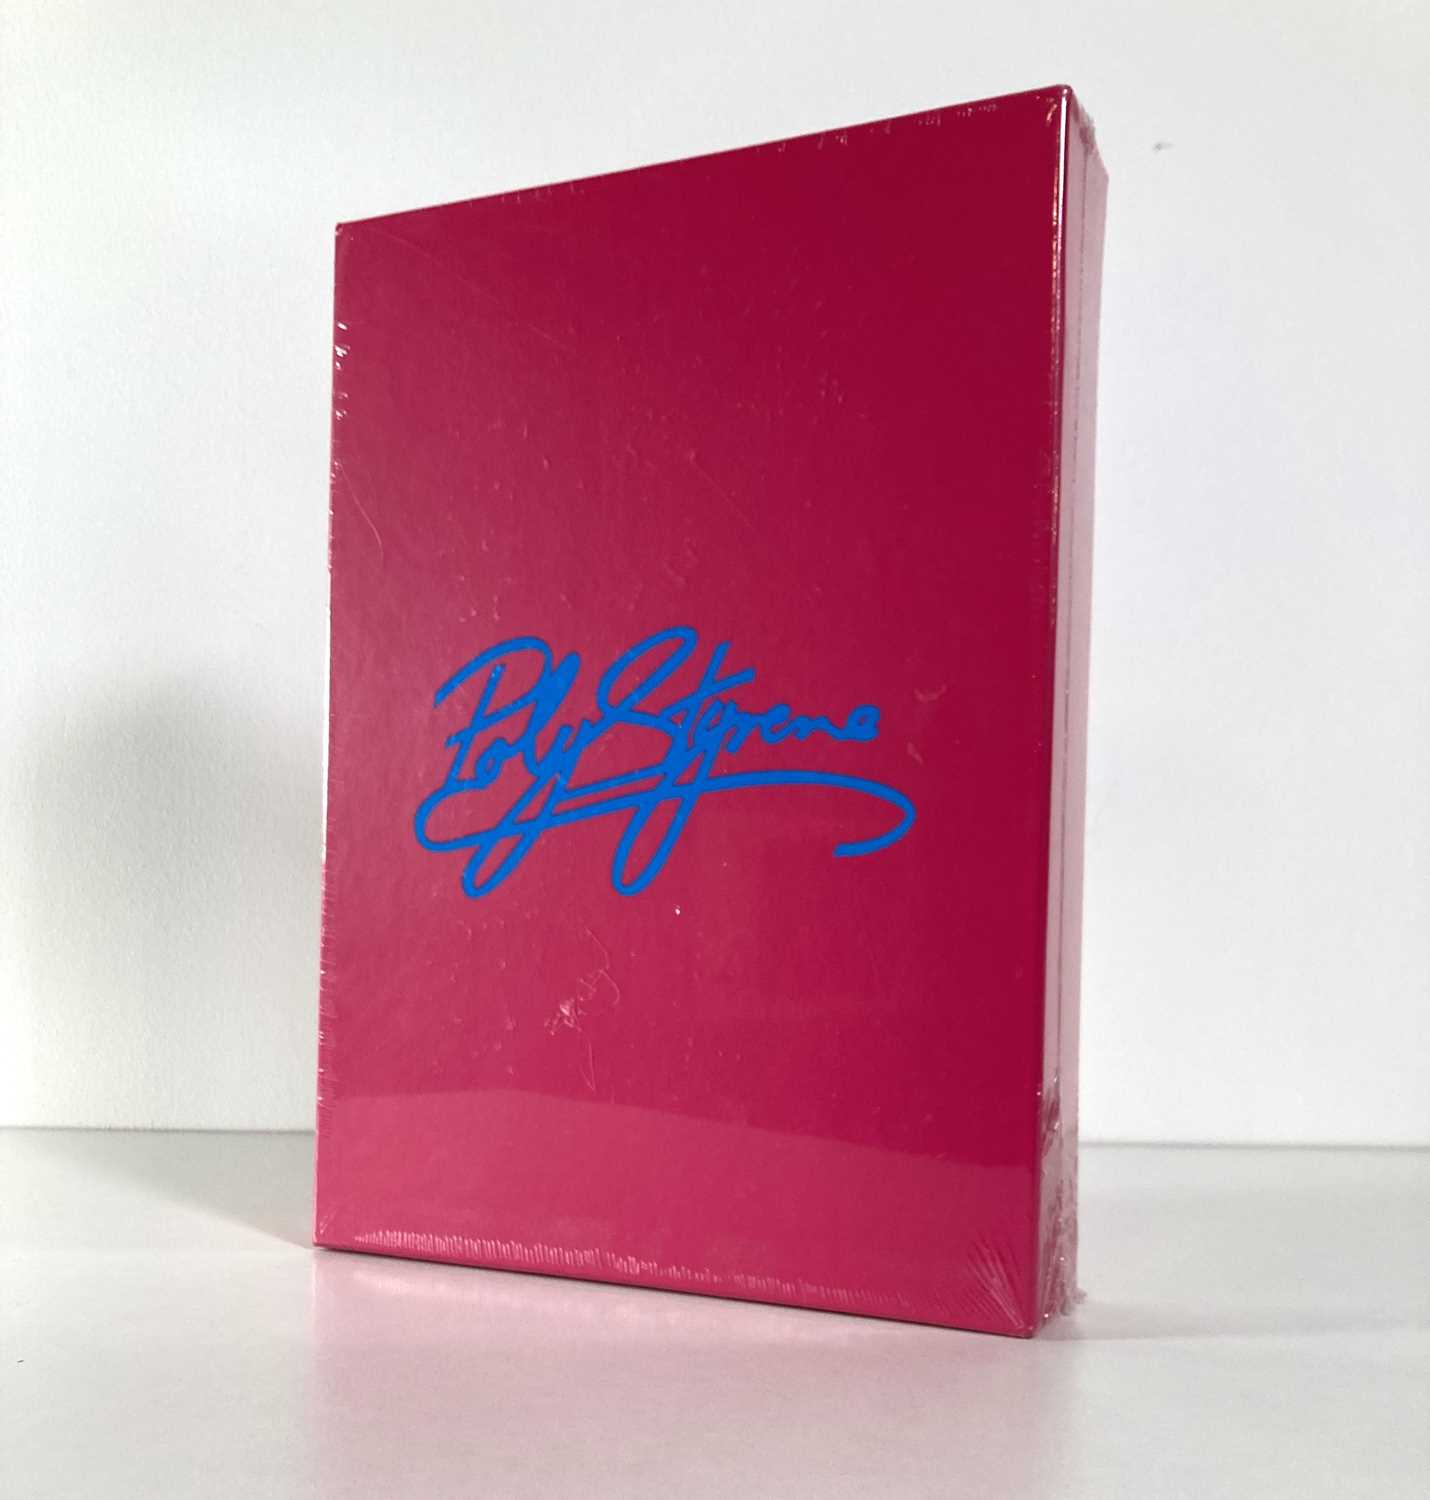 X-RAY SPEX - DAYGLO: THE POLY STYRENE STORY 7" + INSERTS (DELUXE LIMITED EDITION BOX-SET EDITION)